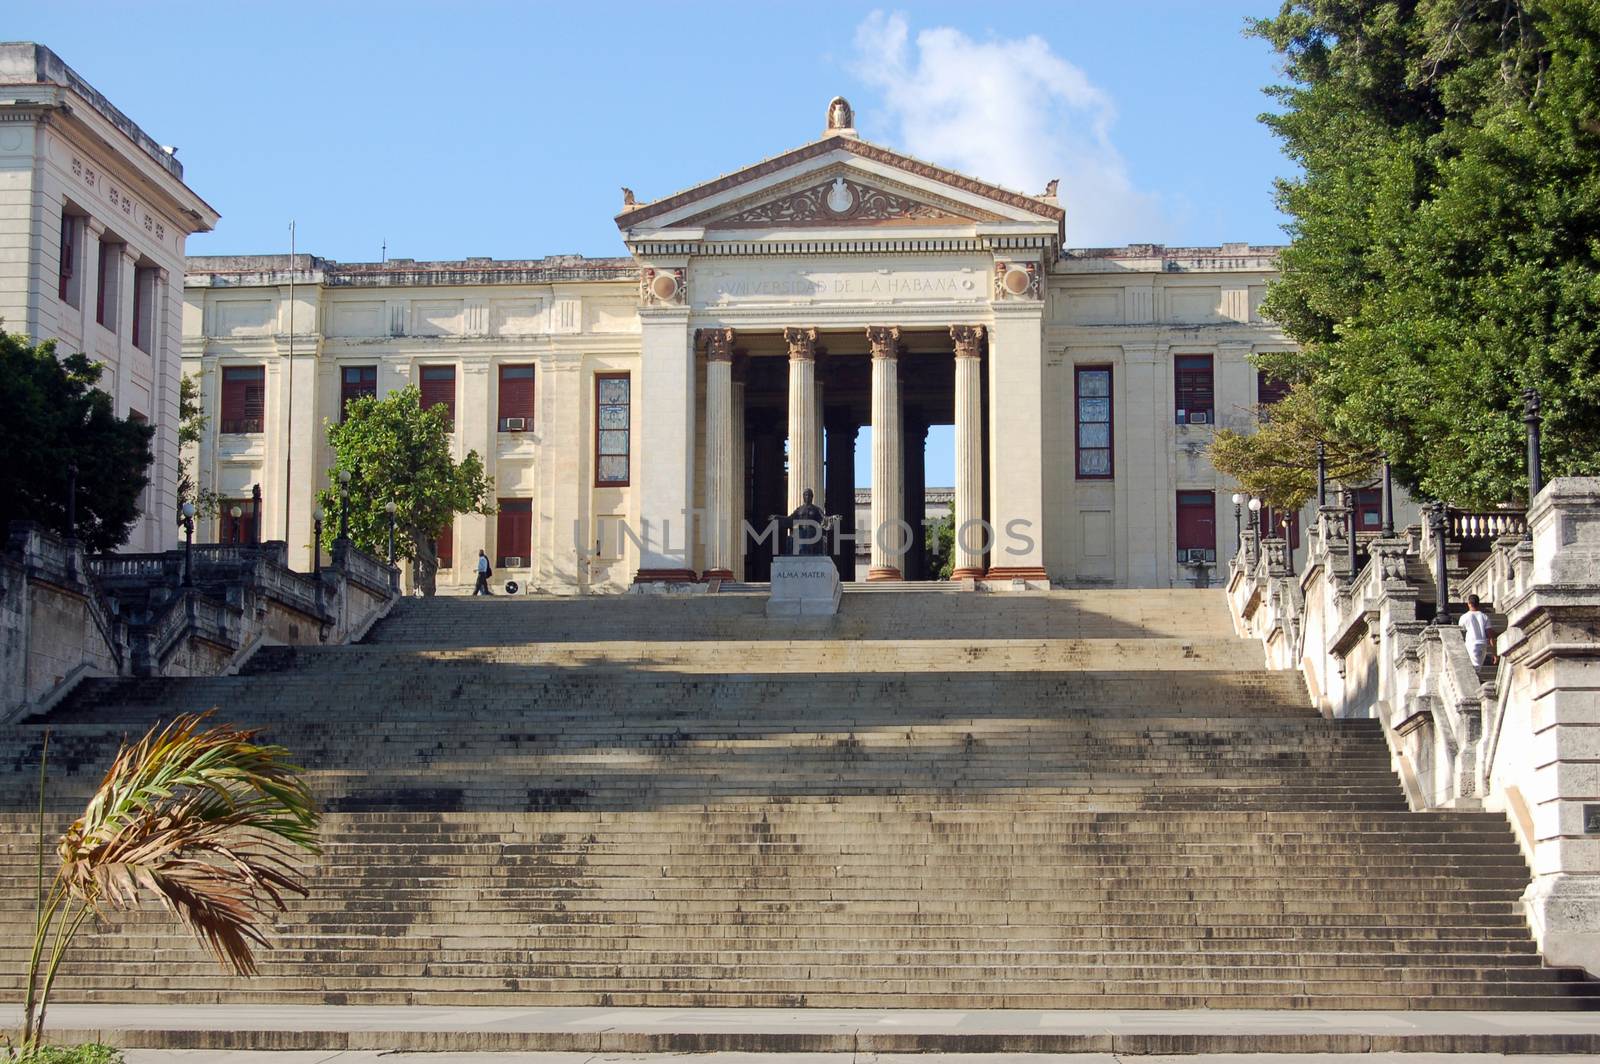 Impressive steps leading to Havana University, Cuba. In the heart of the capital city's Vedado district, this landmark is sometimes used for concerts and rallys.